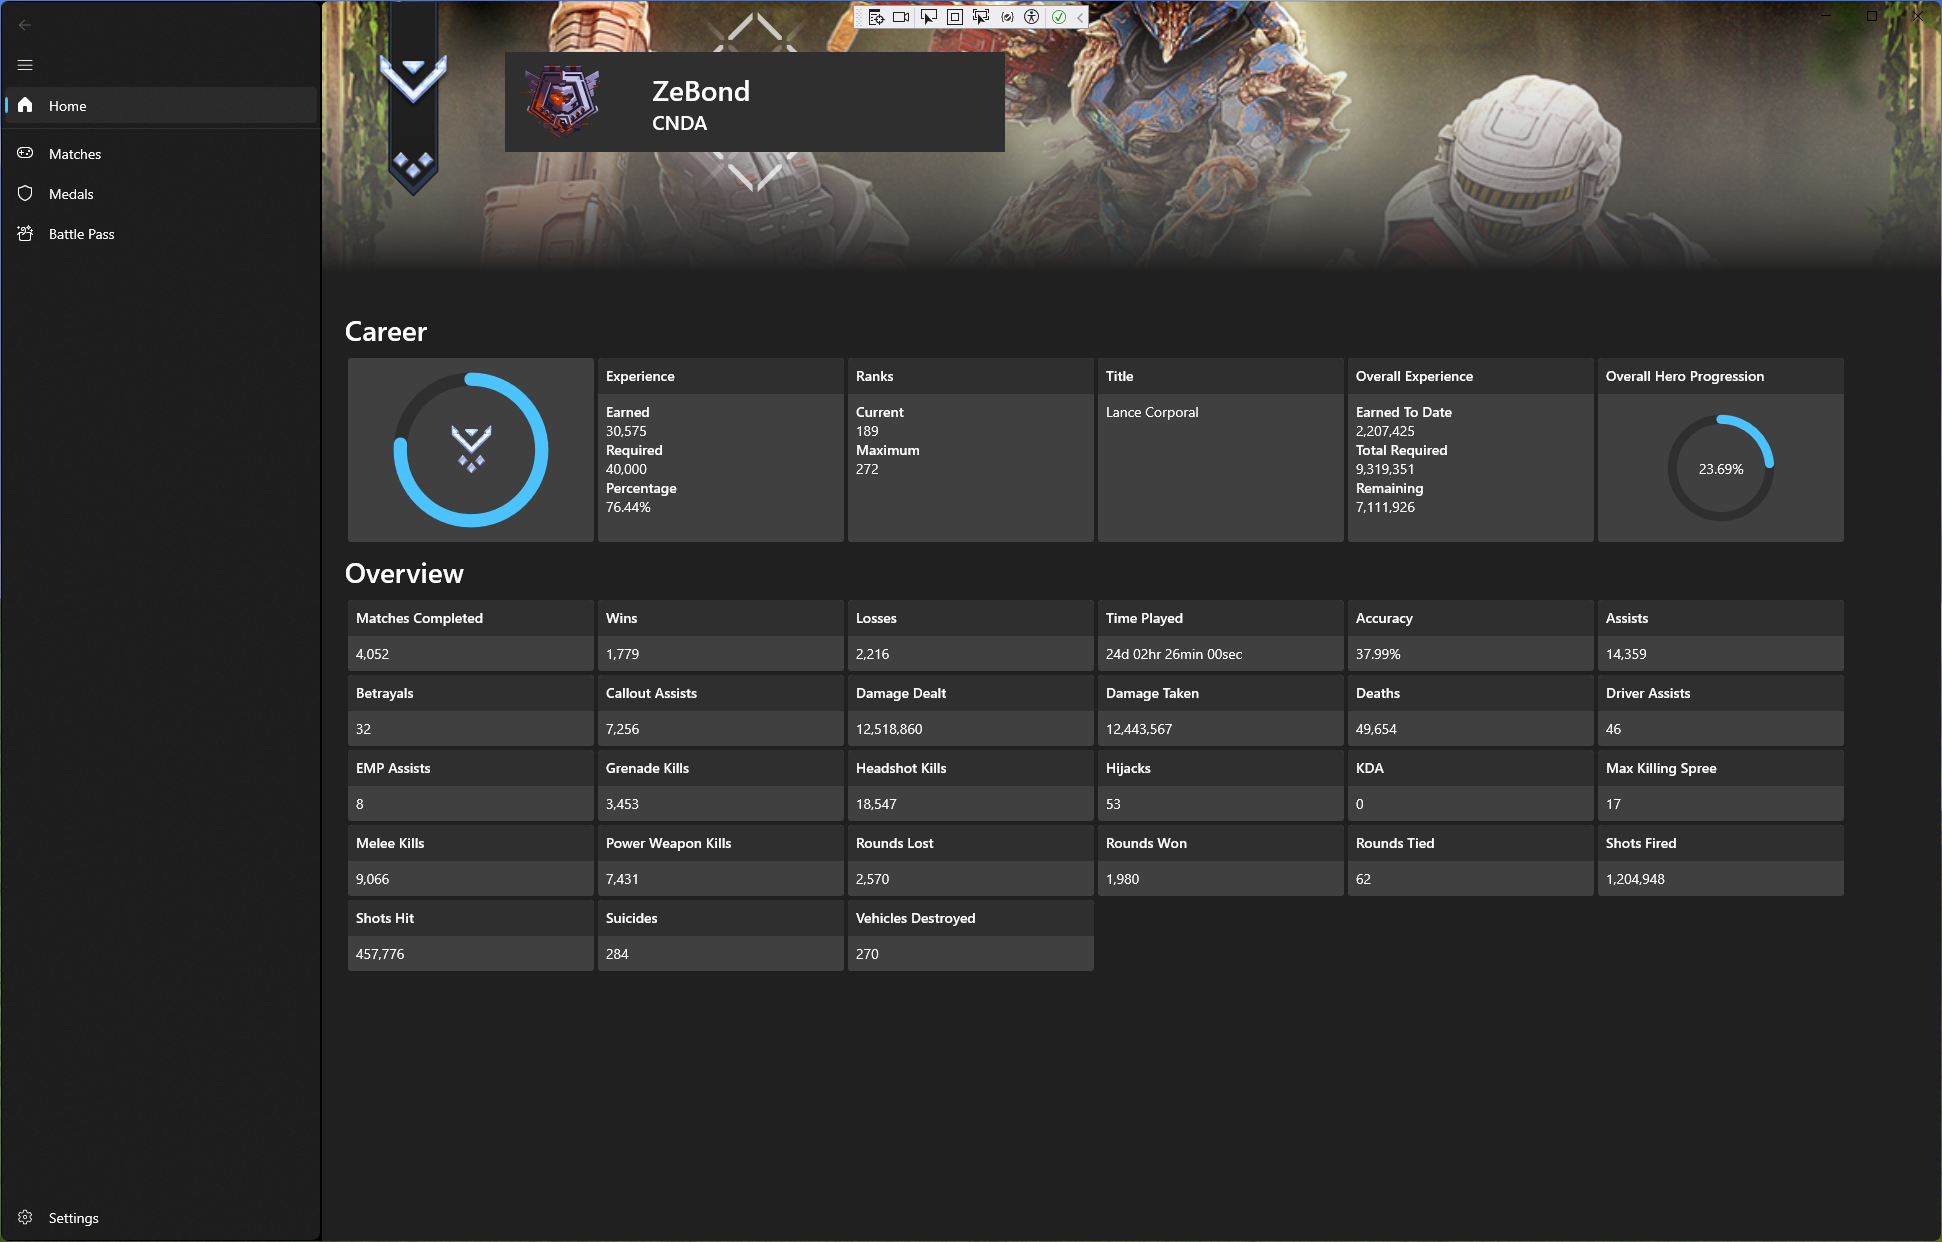 Service record view of a Halo Infinite player, as seen through OpenSpartan.